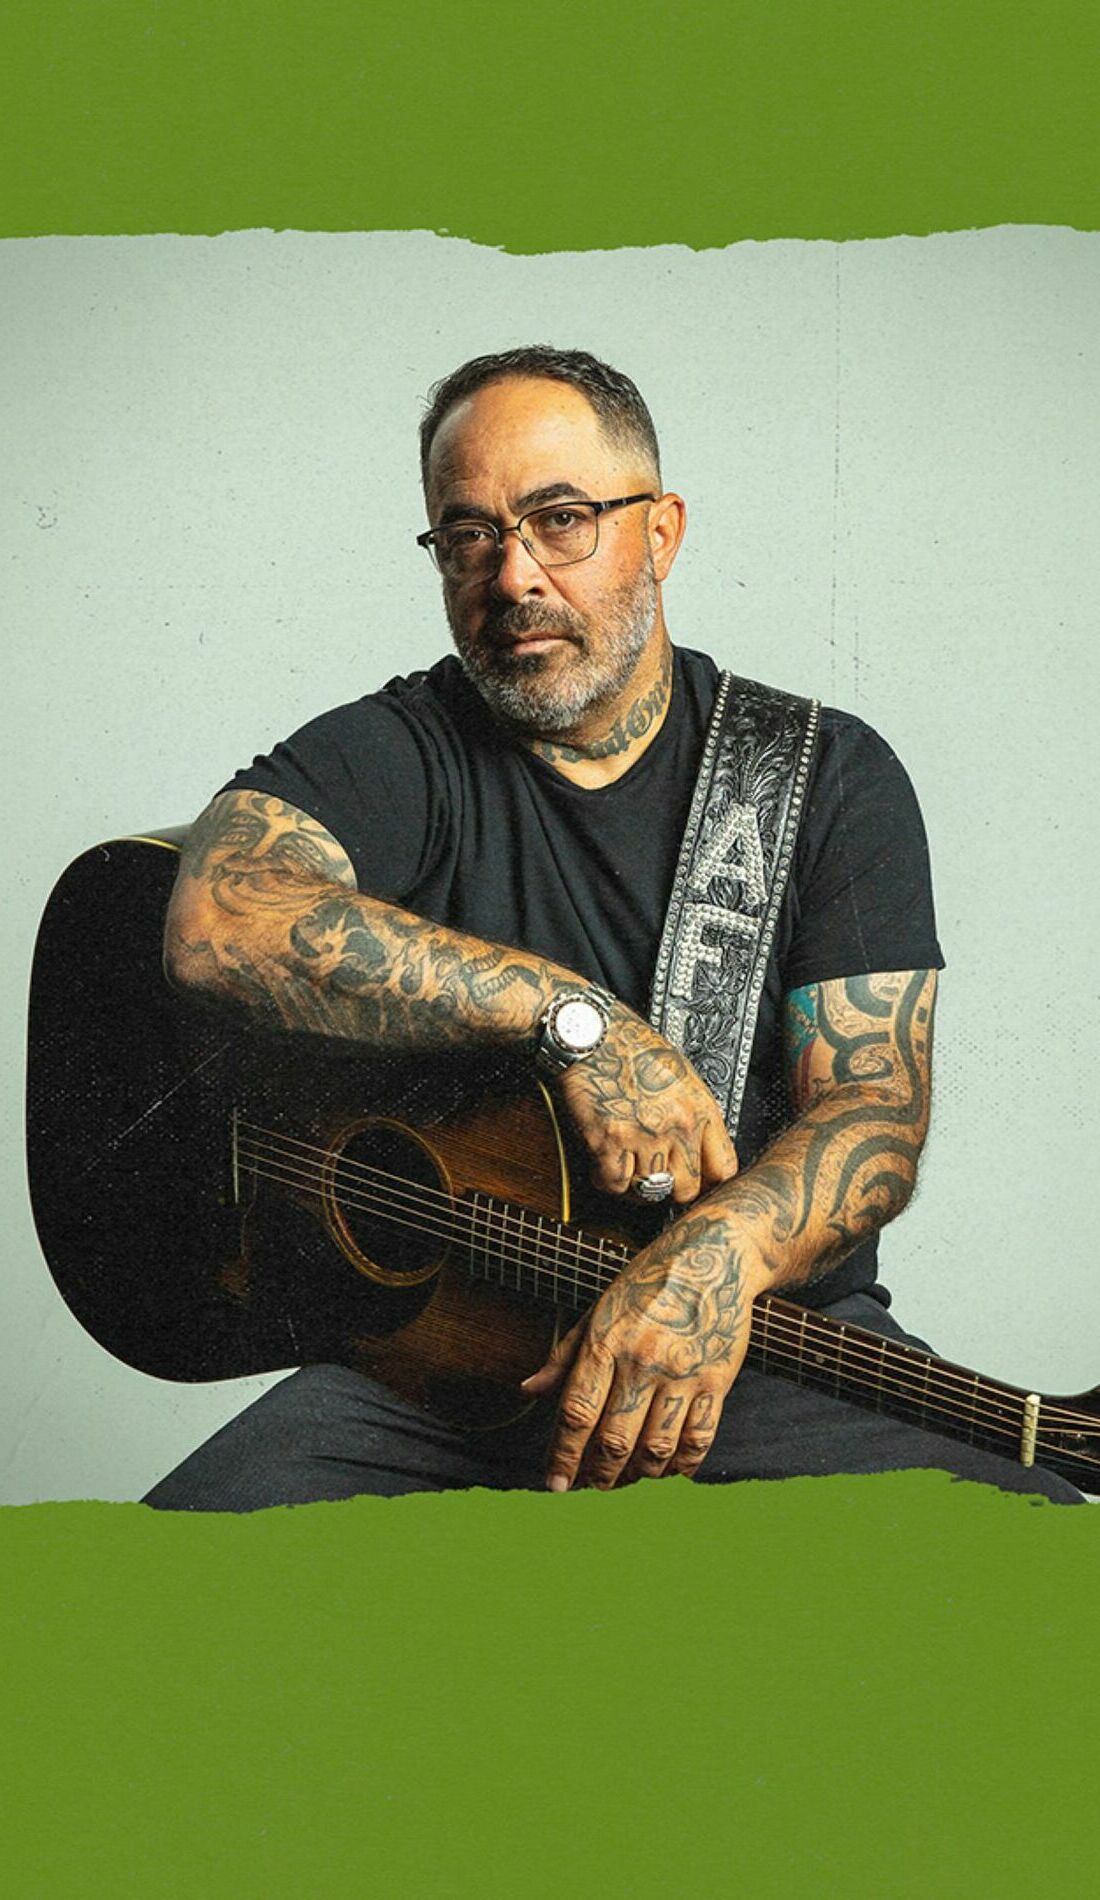 A Aaron Lewis live event